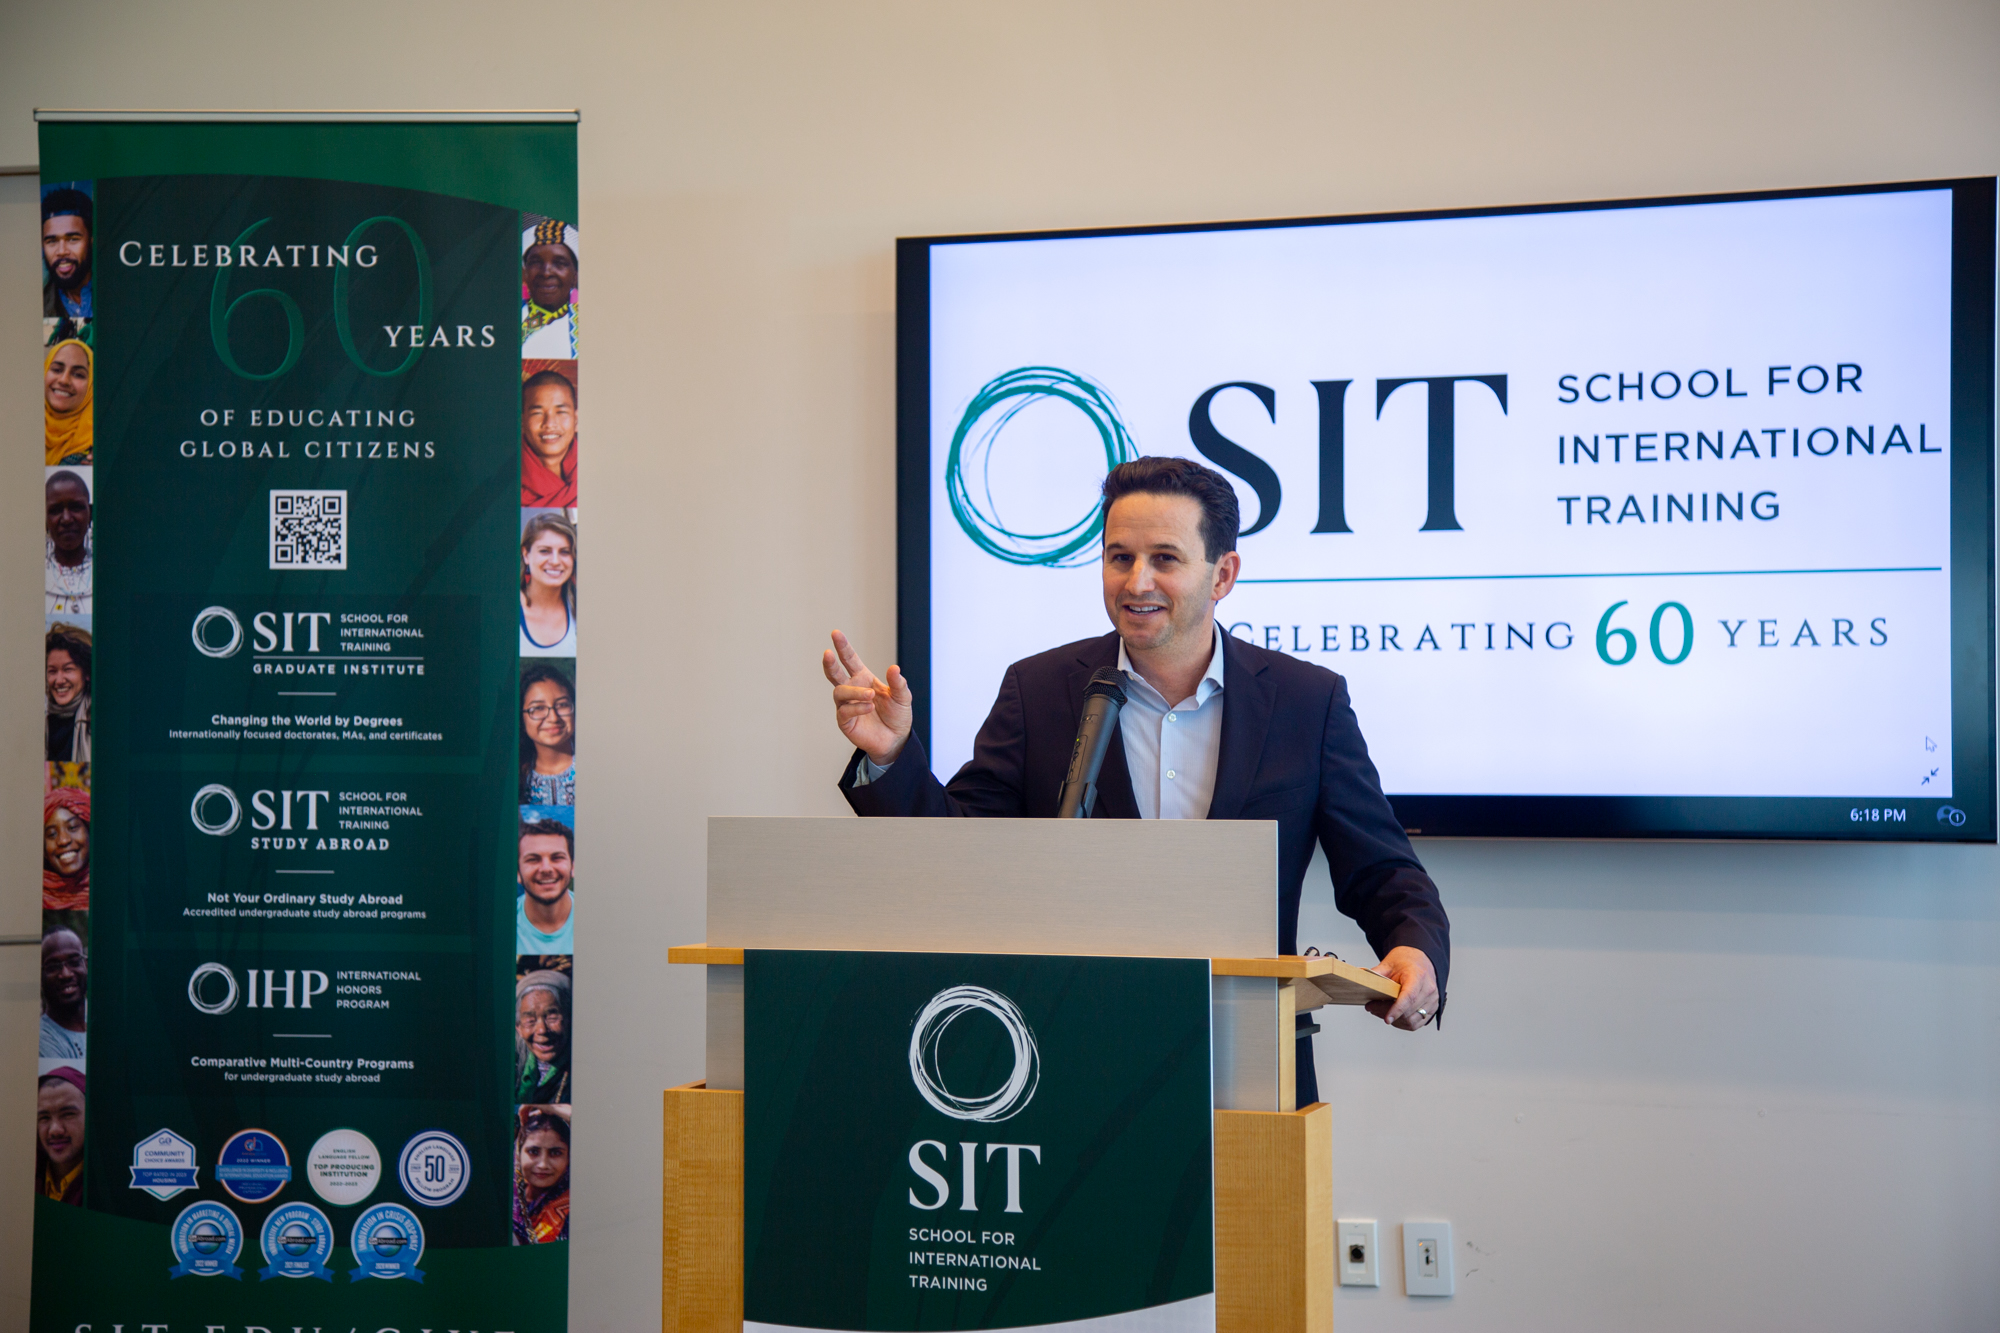 SIT’s history of teaching students a sense of “our common humanity” was theme of Capitol Hill event